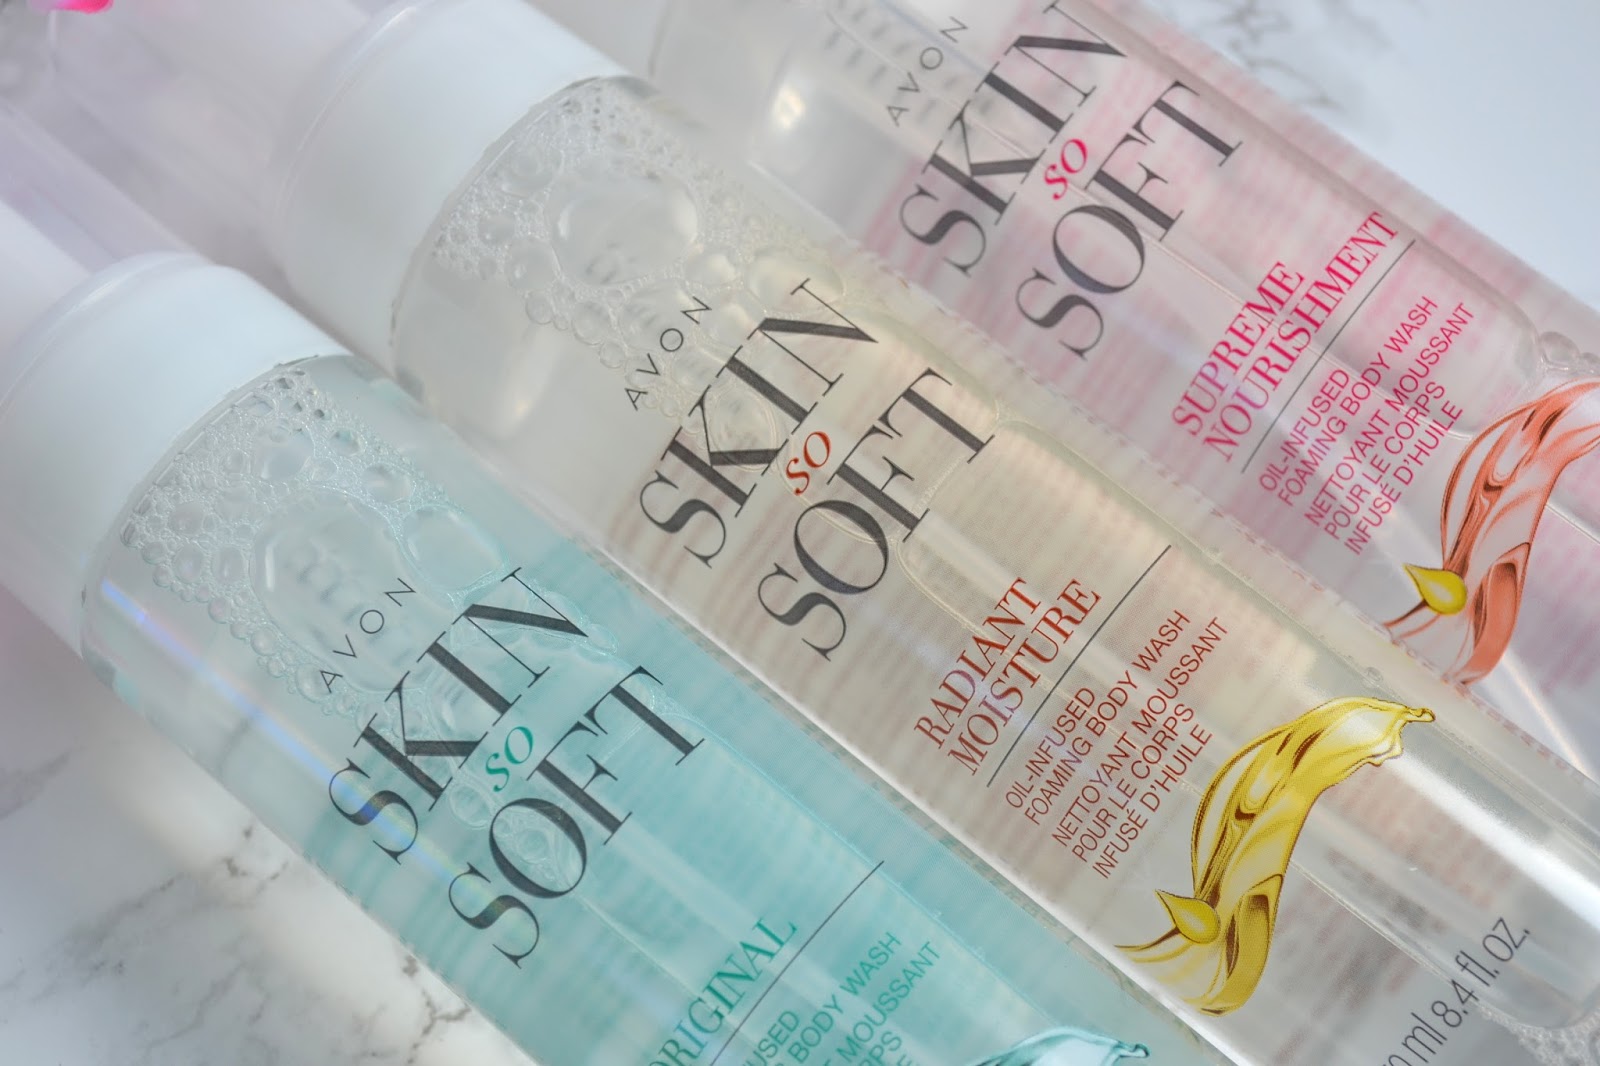 Your Guide to Avon Skin So Soft